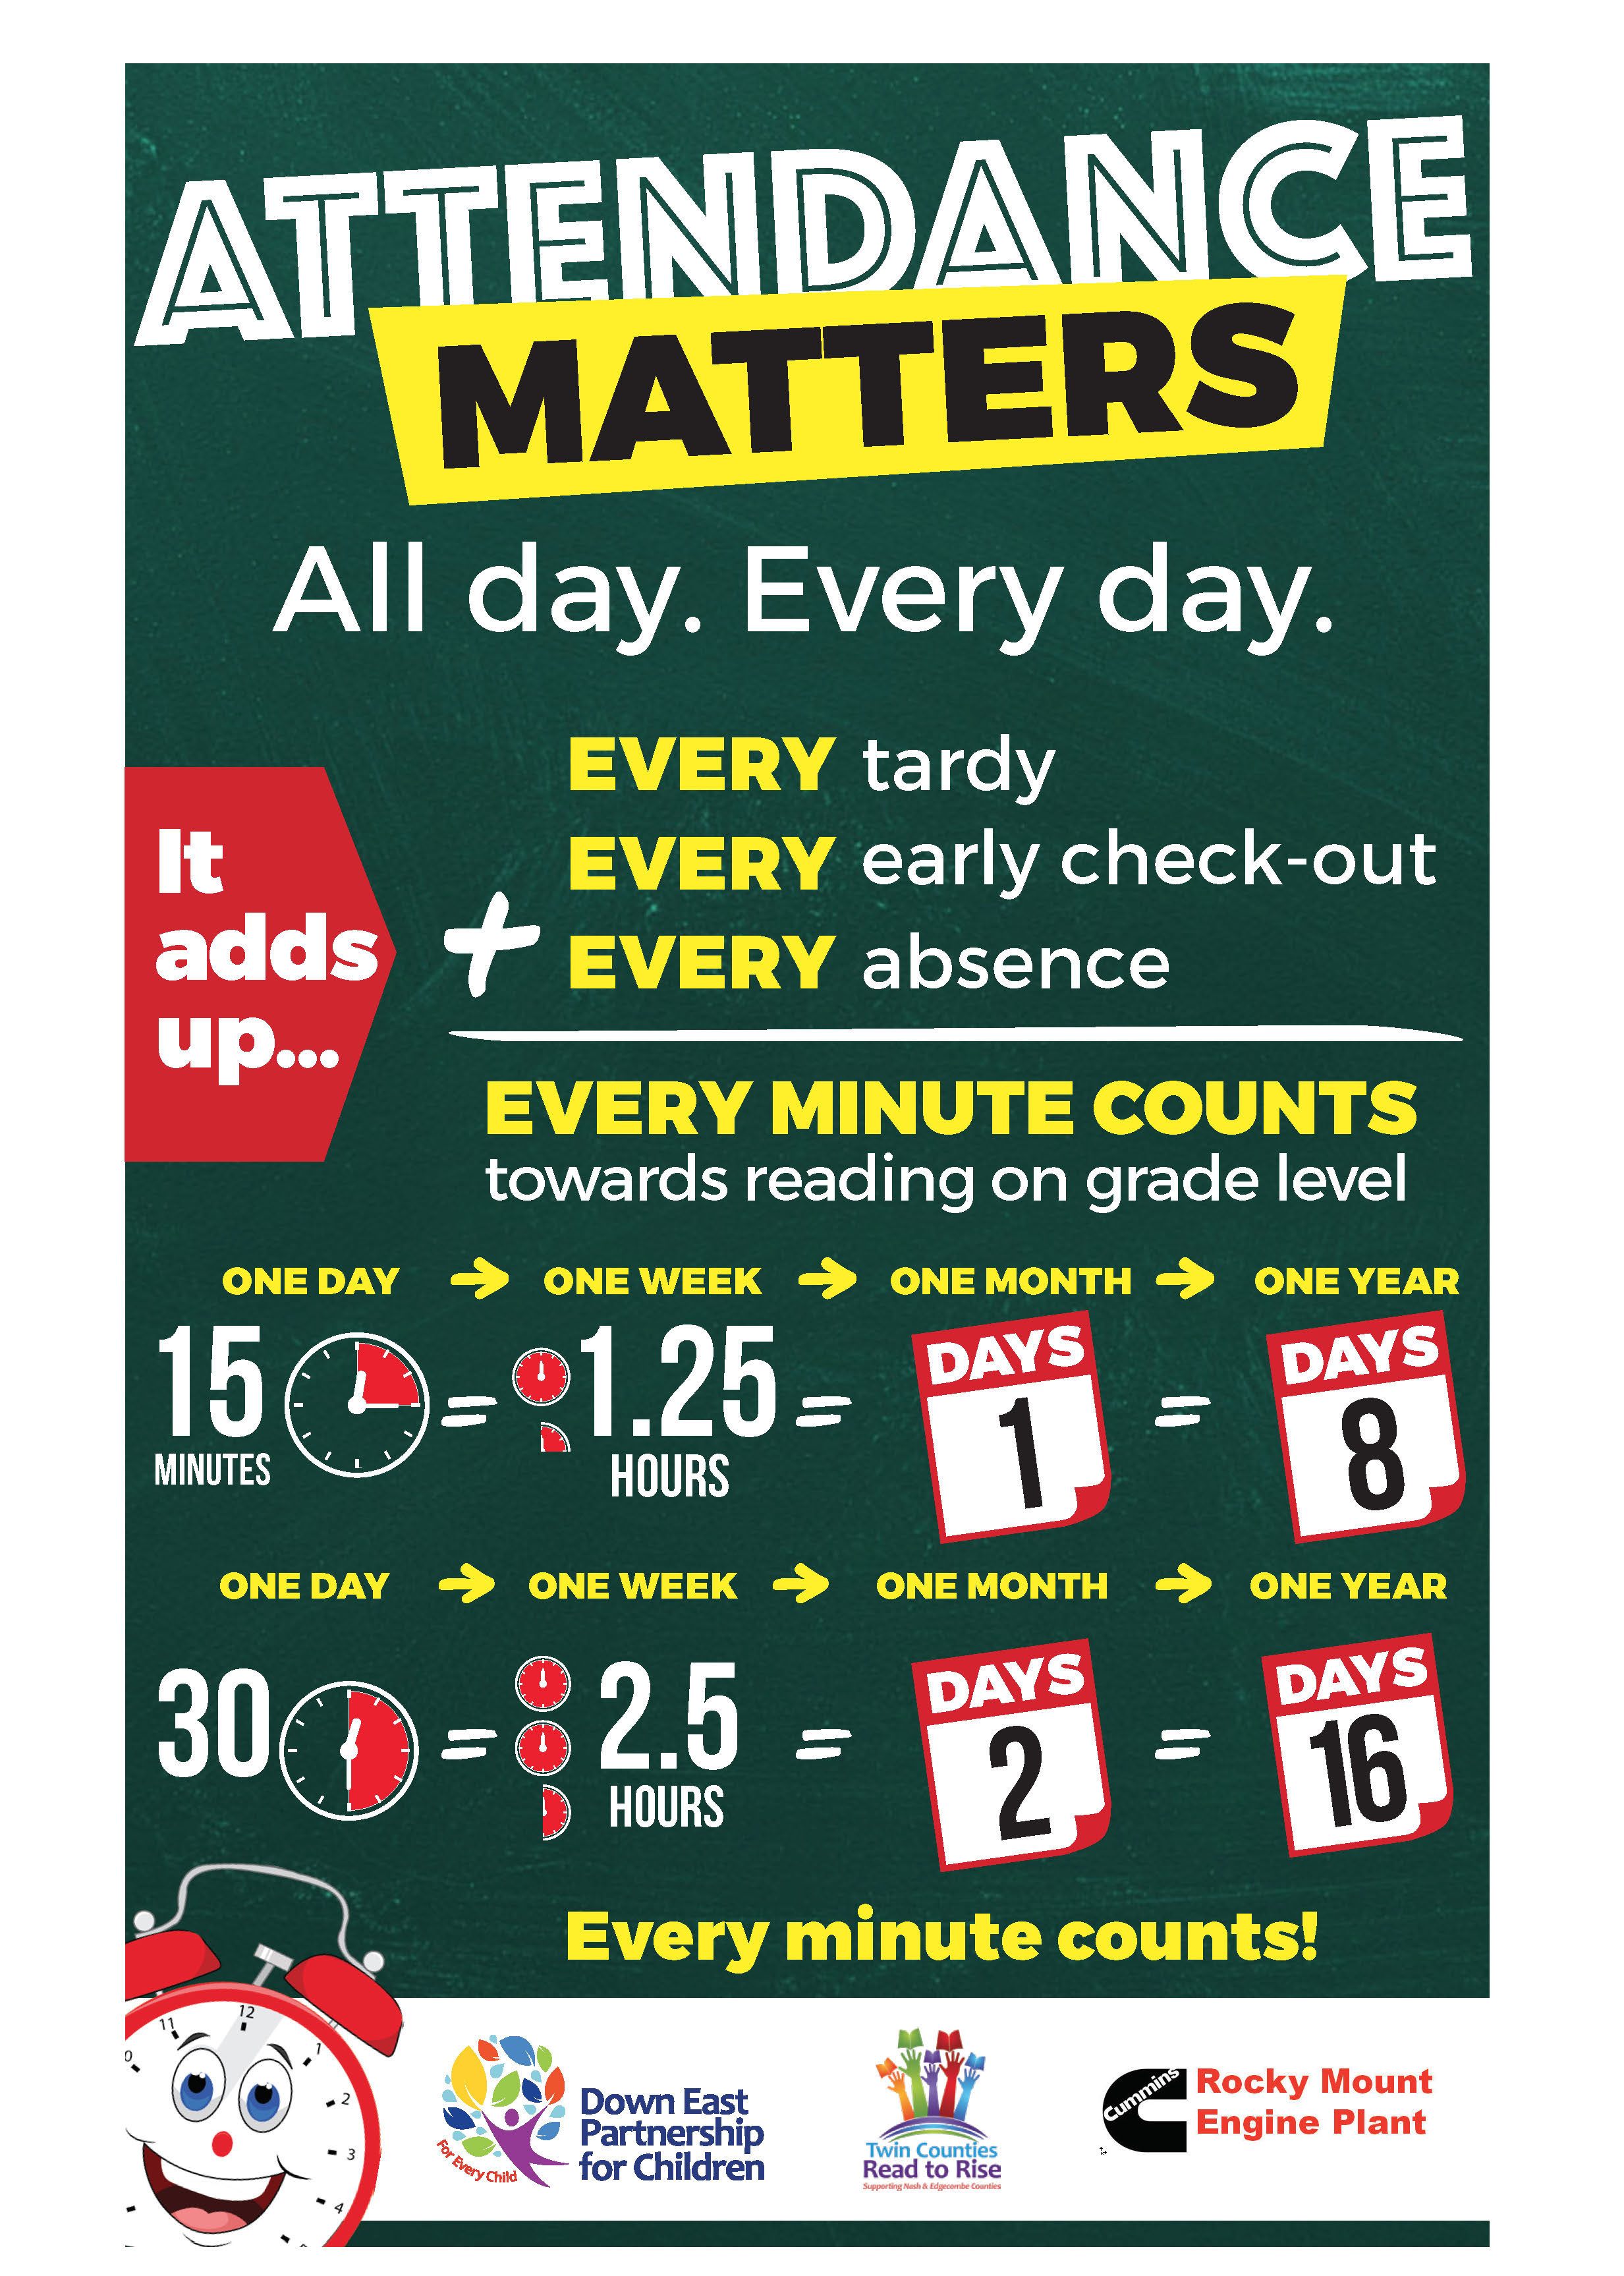 Attendance Posters For Schools paringinst1